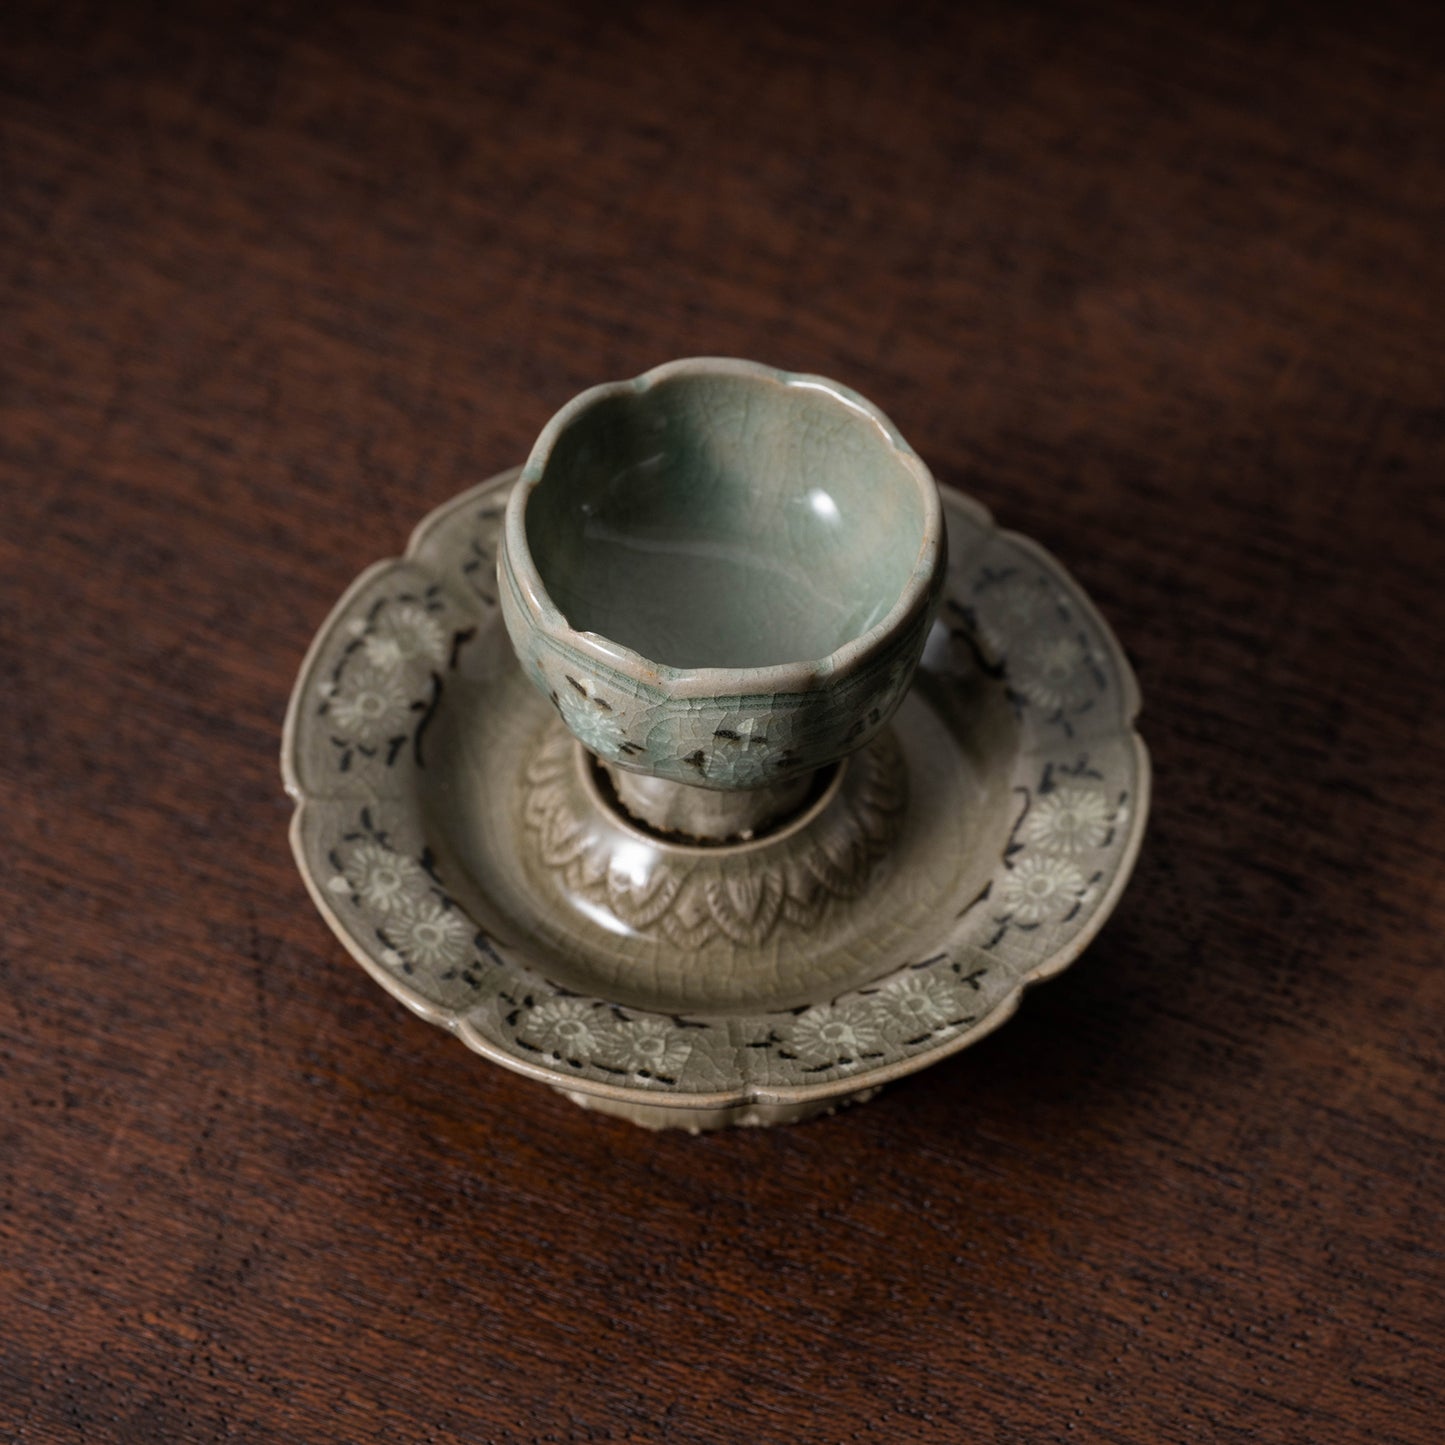 Goryeo Celadon Lobed Cup and Stand with Inlaid Chrysanthemum Design